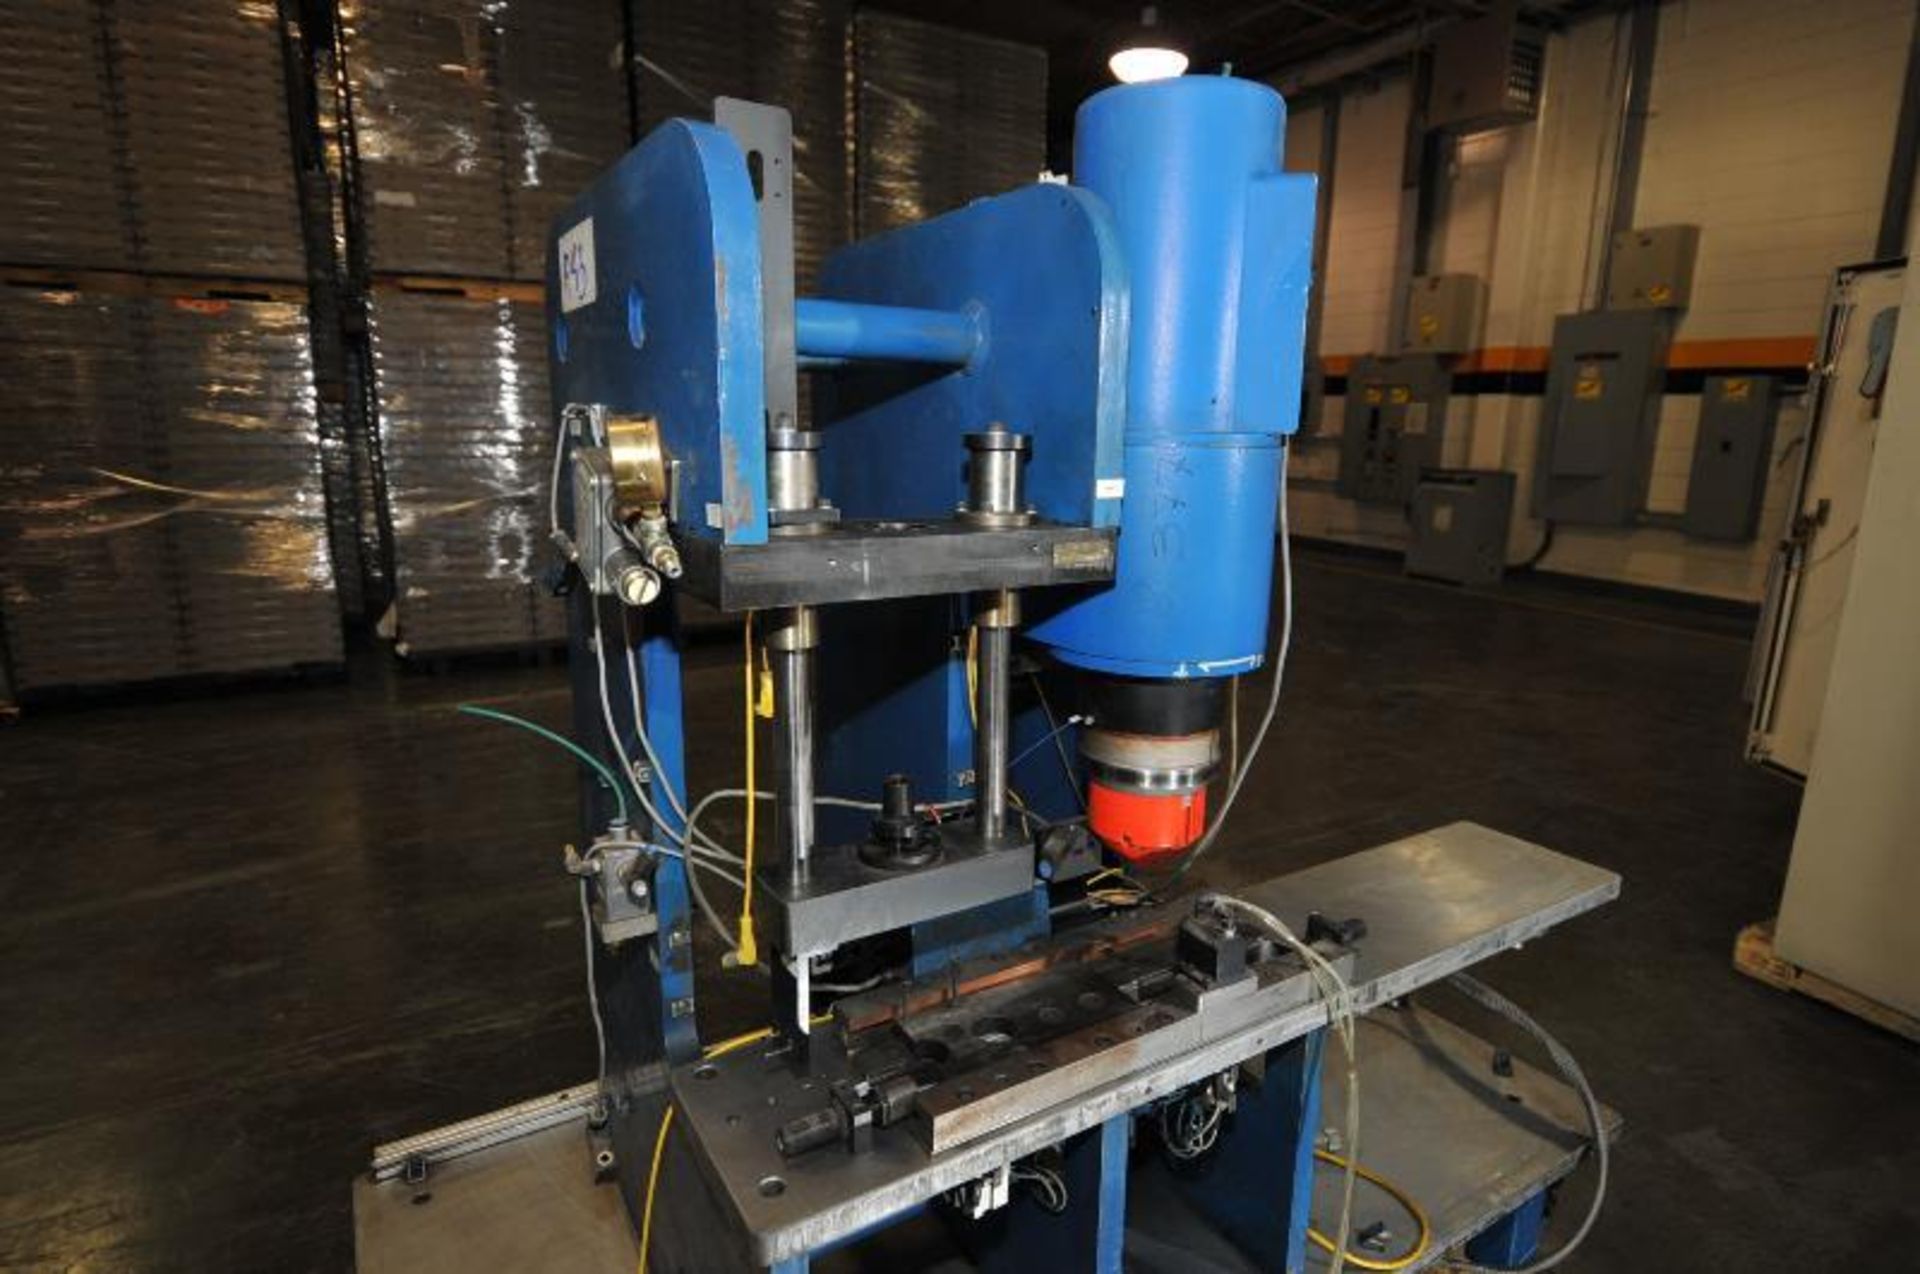 workstation for Industrial Riveter, brand: inovative automation, condition: spare parts. Location: - Image 8 of 11